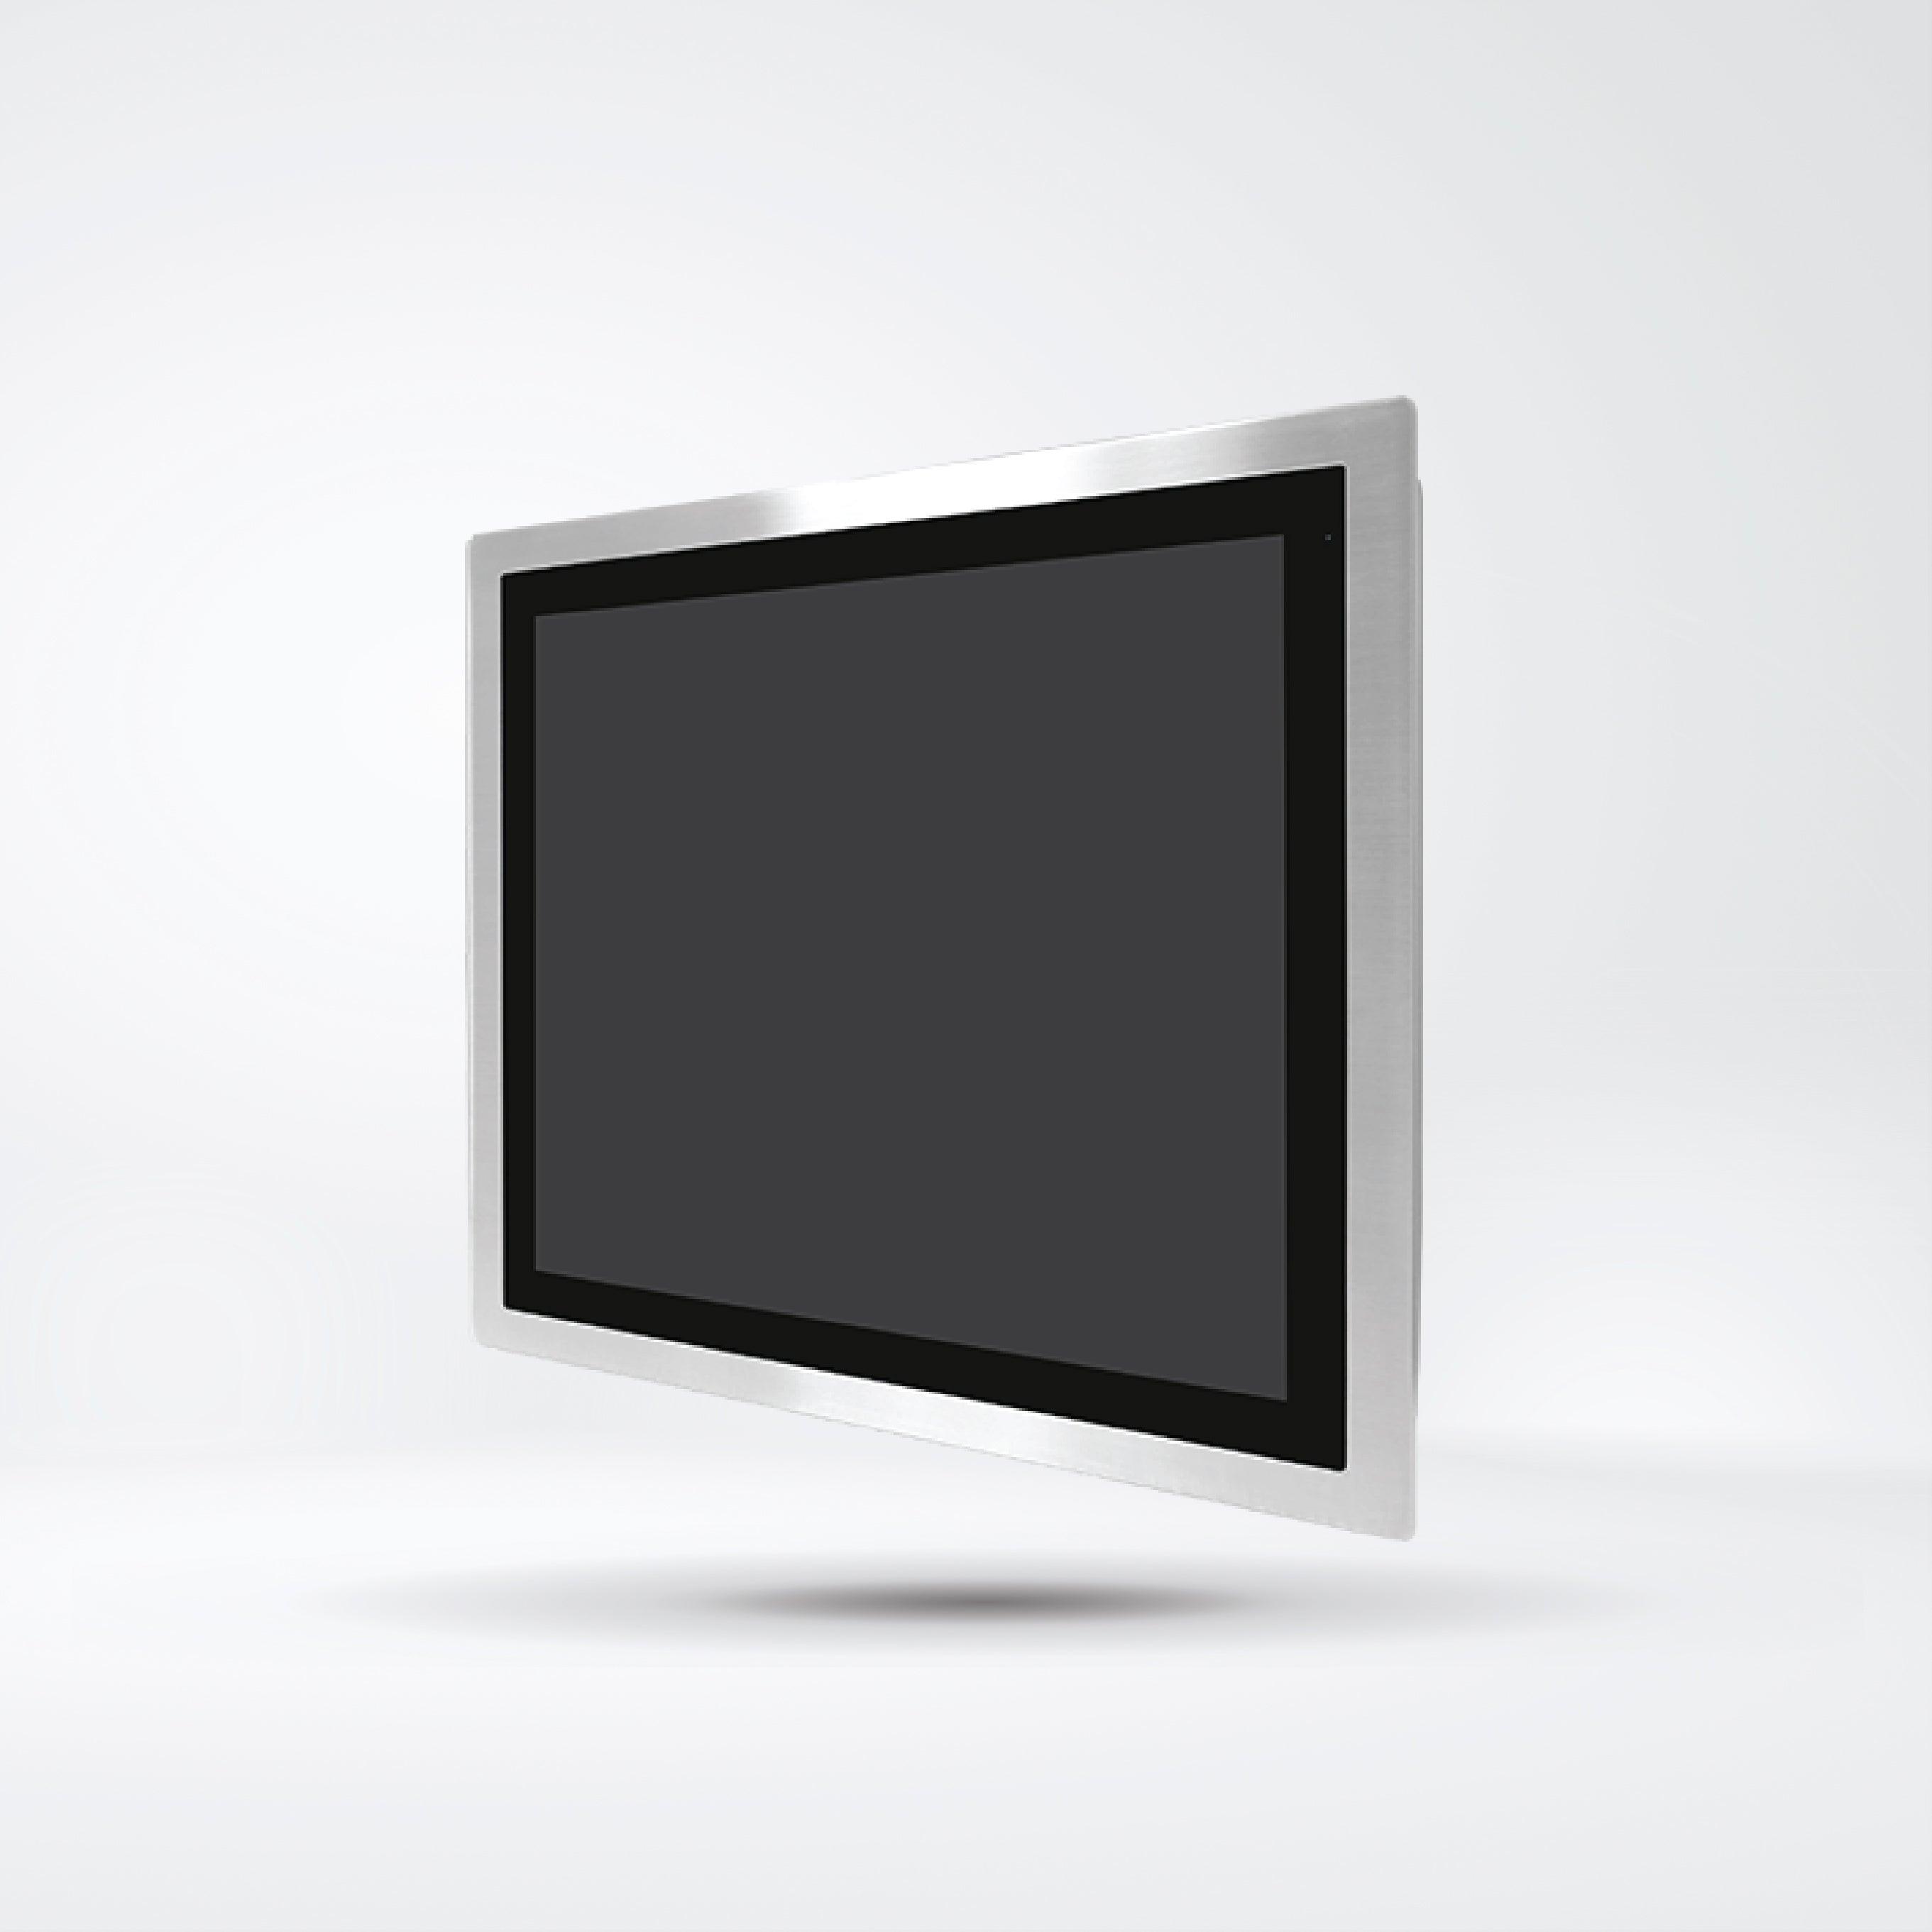 FABS-119P 19” Flat Front Panel IP66 Stainless Chassis Display - Riverplus